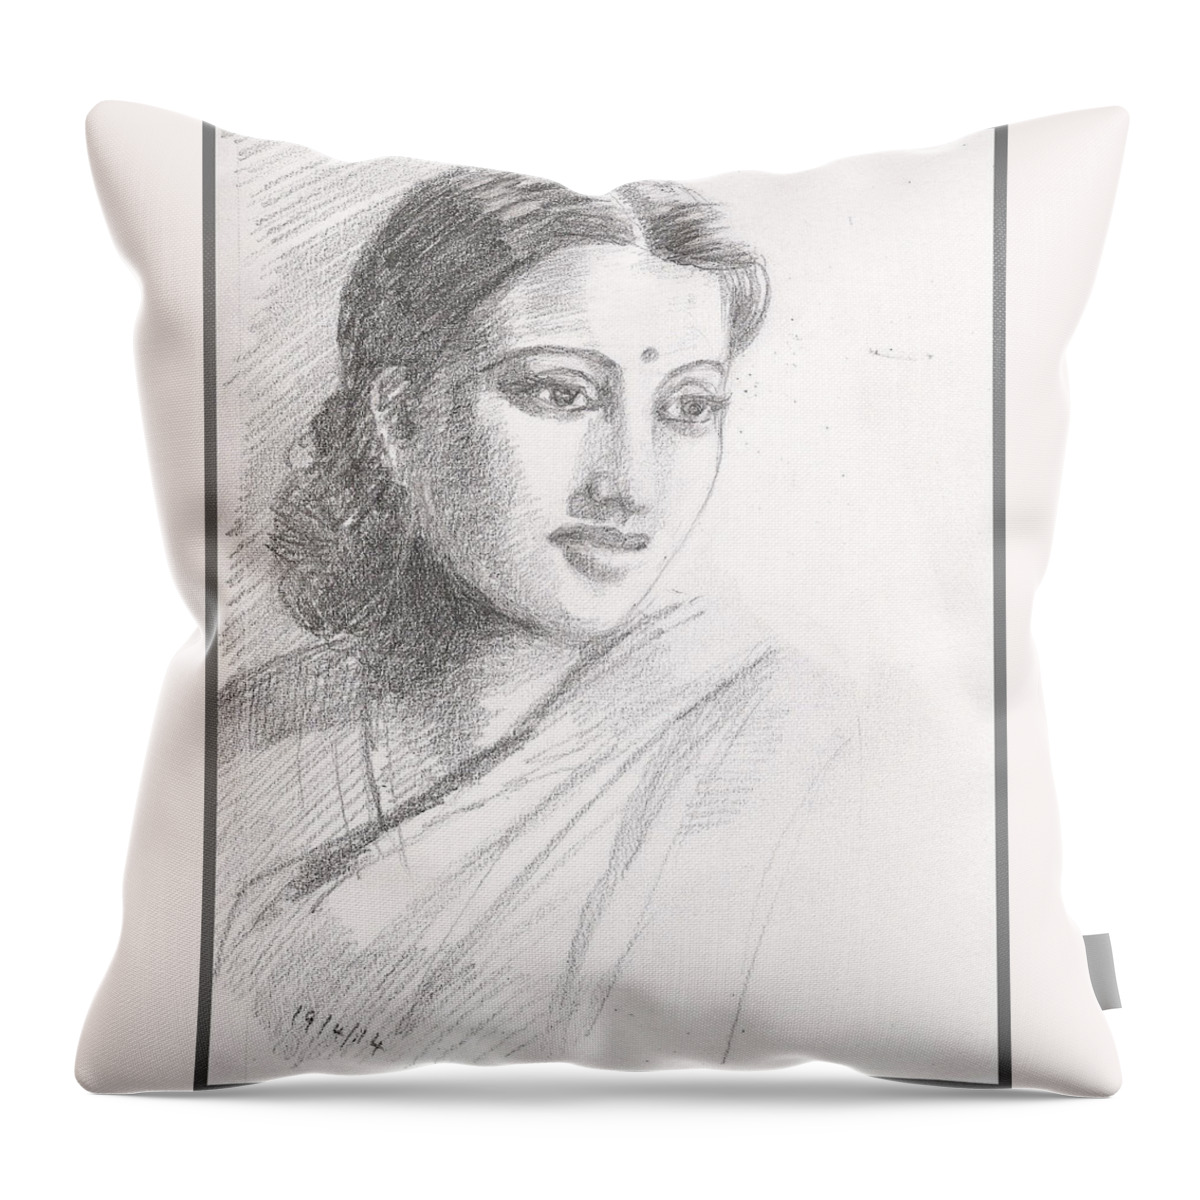 Indian Woman Throw Pillow featuring the drawing Indian Woman by Asha Sudhaker Shenoy